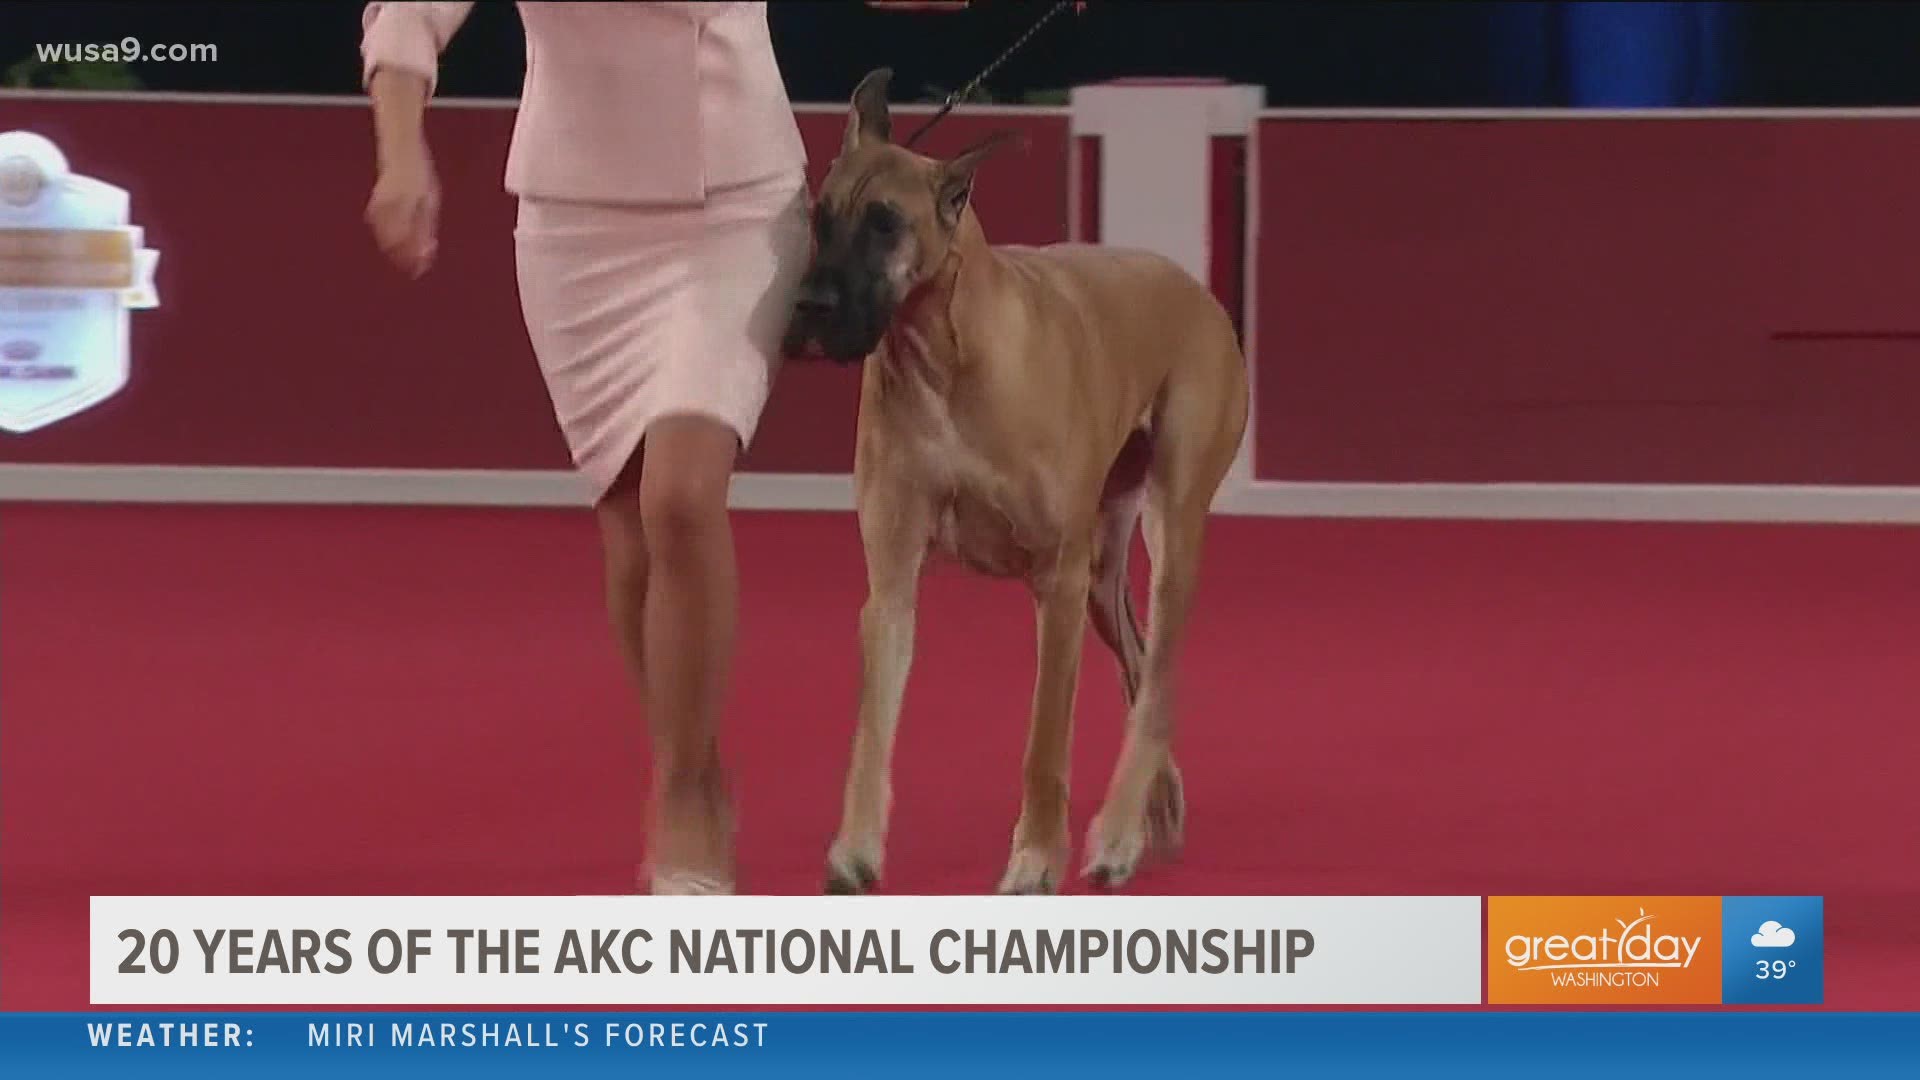 Sponsored by The American Kennel Club. Their 20th season show airs this Sunday, January 18, 2021.